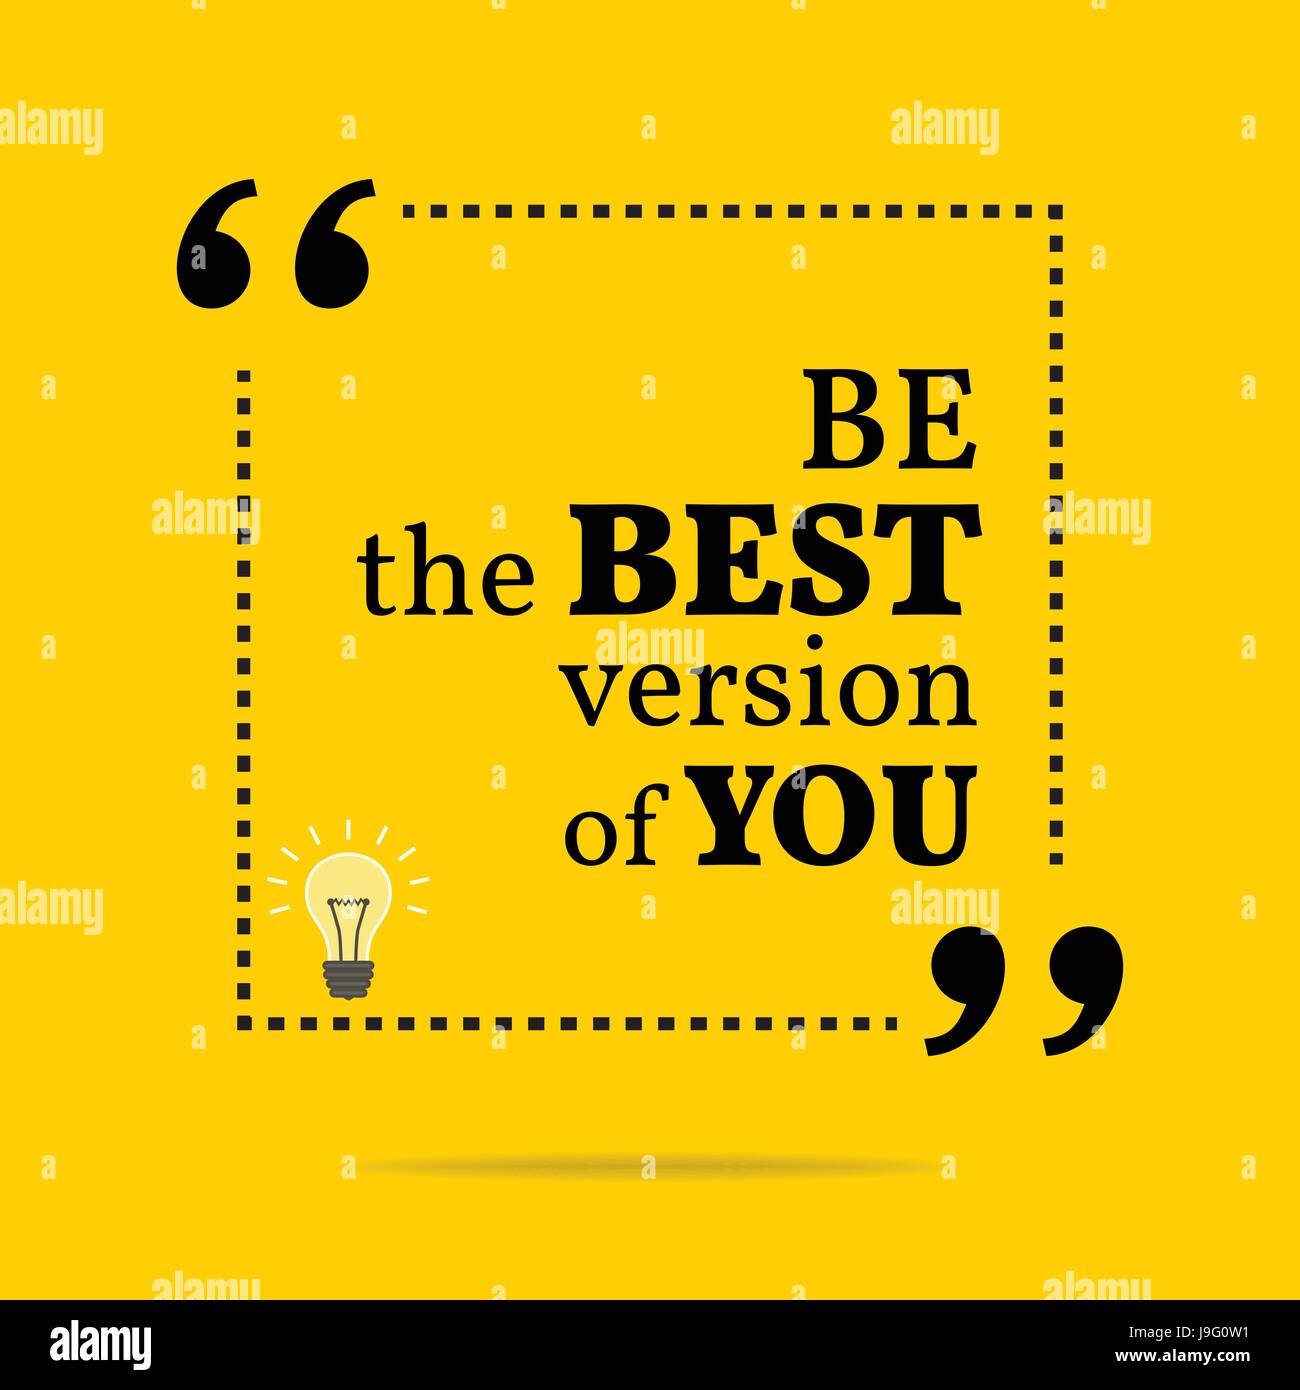 Inspirational motivational quote. Be the best version of you. Simple trendy design. Stock Vector